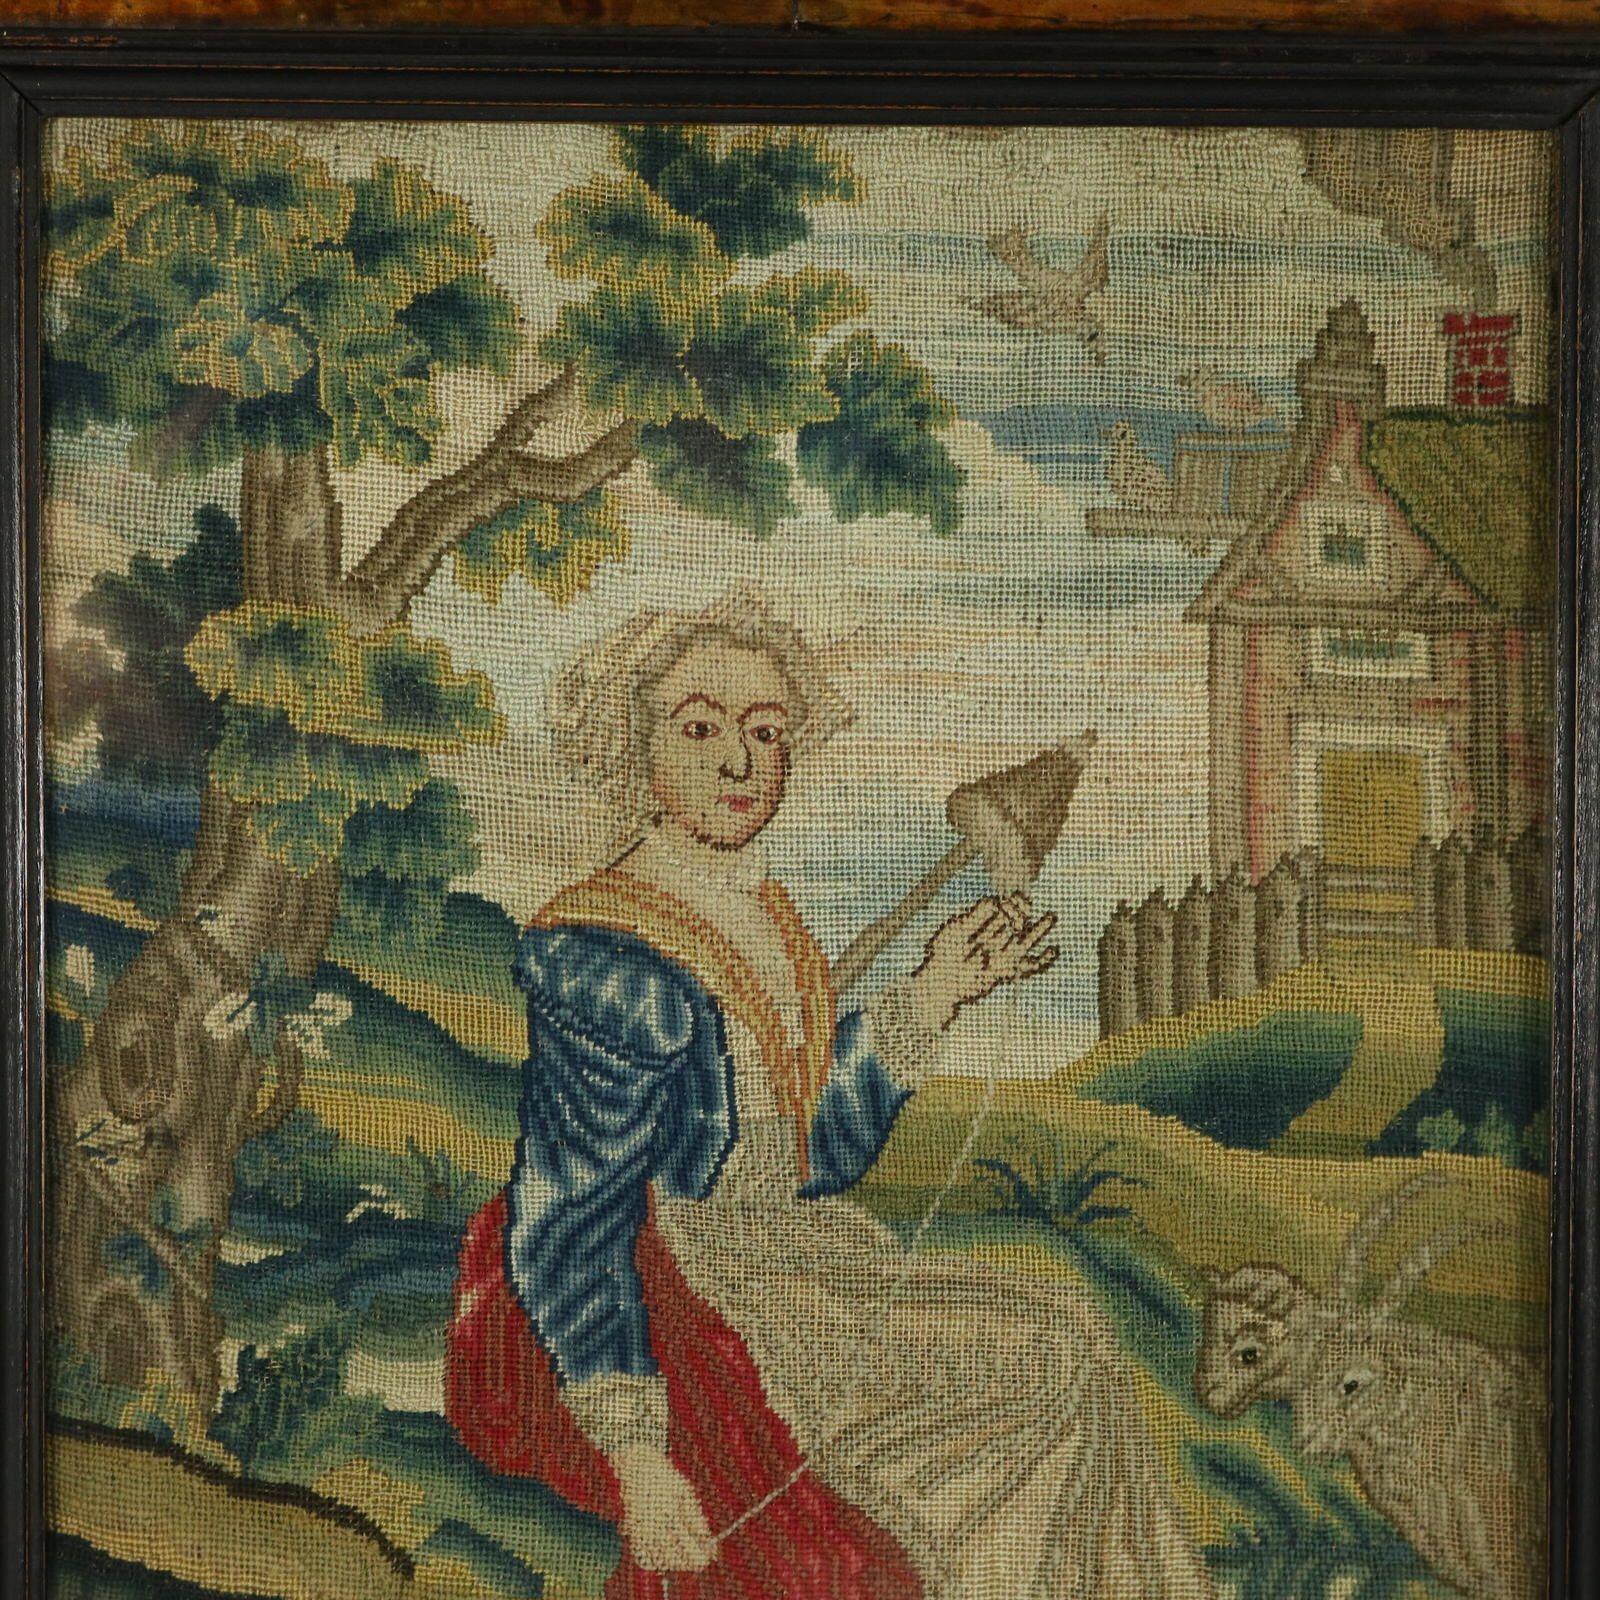 An 18th Century petit point silkwork embroidery of a lady seated next to a tree, in a country landscape. Goats, a dog and sheep in the foreground. A house in the background with a smoking chimney and birds perched on the roof. The piece is worked in